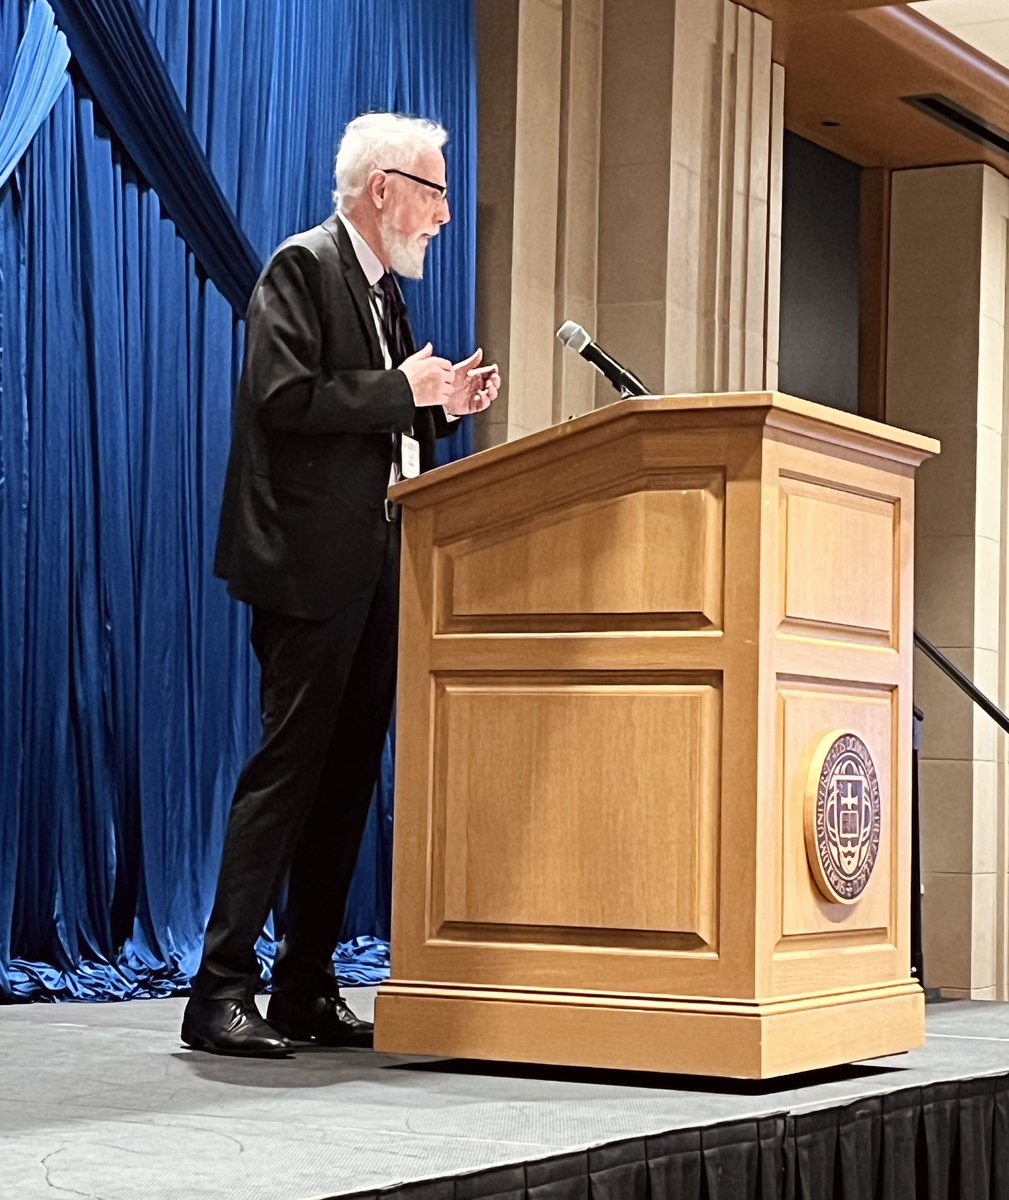 Cyril O’Regan reflecting on the “voice, vision, witness, and gratitude” of Pope Benedict XVI to kick off the @ND_EthicsCenter conference on Ratzinger’s legacy ethicscenter.nd.edu/programs/bxvi-…